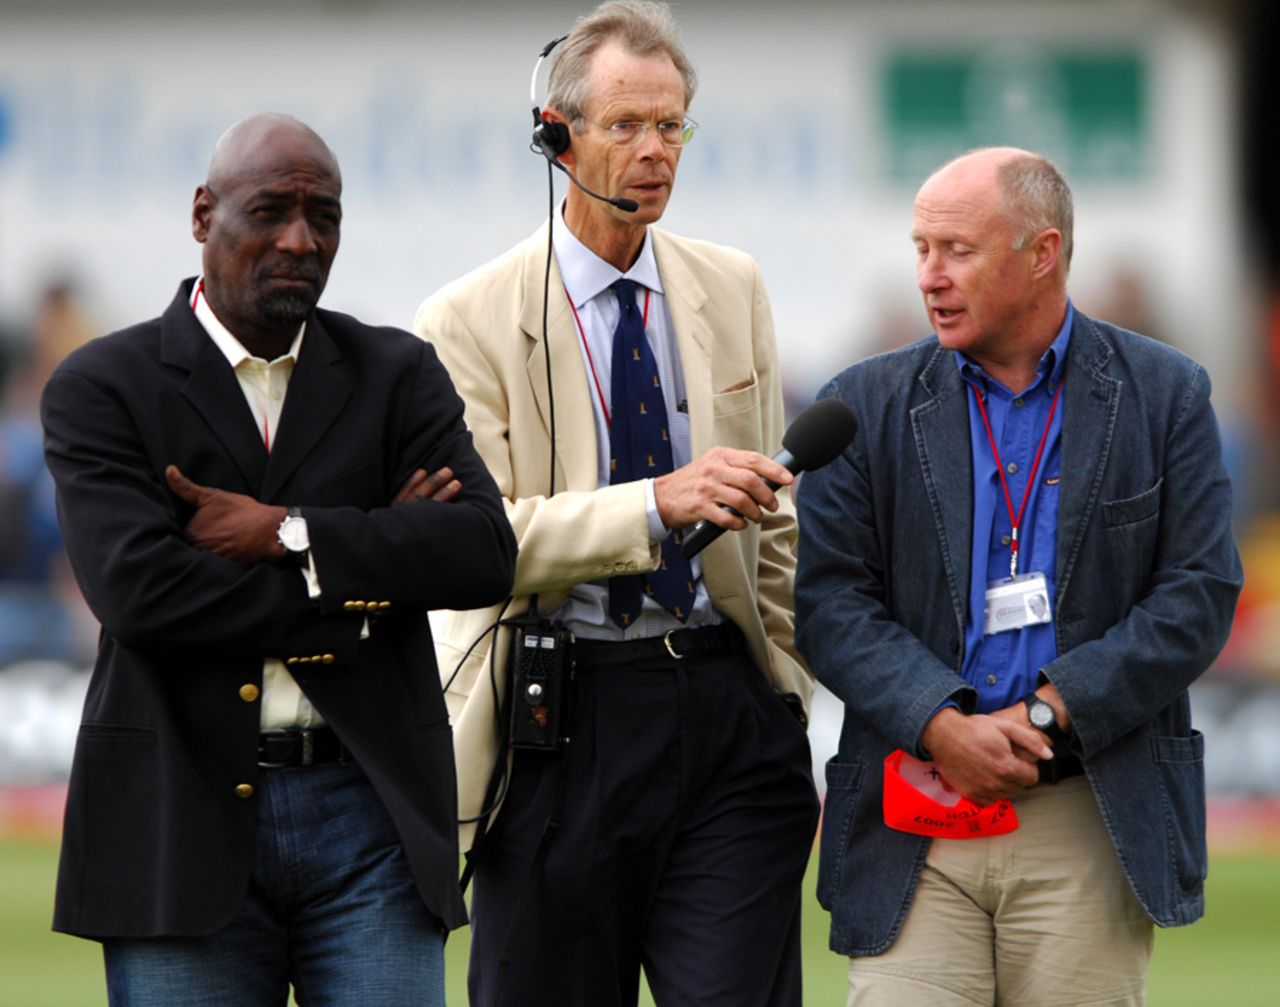 Viv Richards, Christopher Martin-Jenkins and Vic Marks on the field, England v West Indies, 2nd Test, Headingley, 2nd day, May 26, 2007